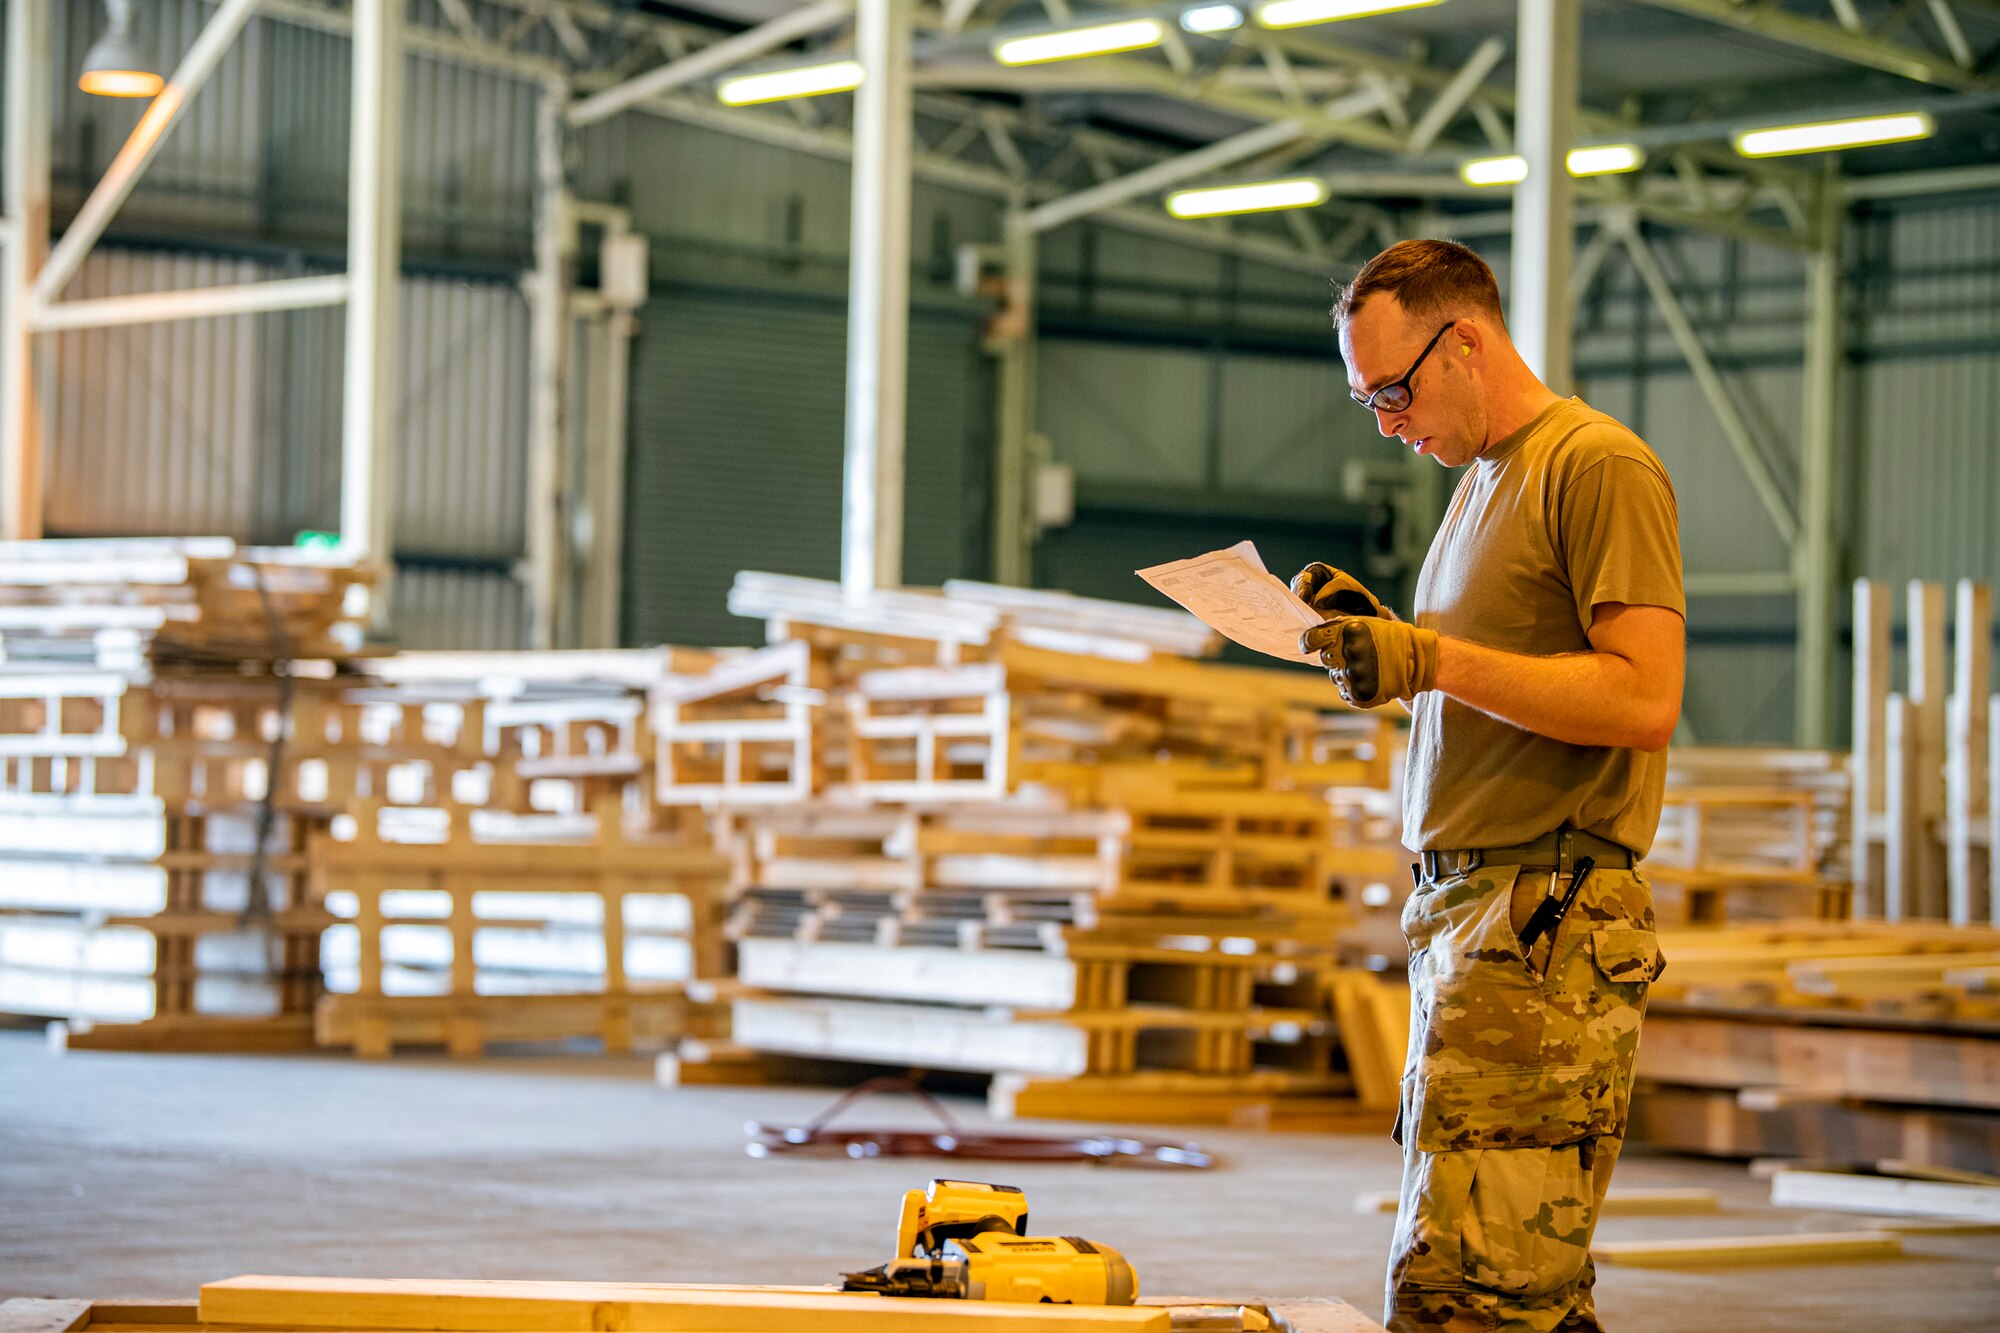 U.S. Air Force Tech. Sgt. Brandon Mullenix, 420th Munitions Squadron Conventional Maintenance Section Chief, reads a technical order at RAF Welford, England, Sept. 7, 2021. Airmen from the 420th MUNS constructed multiple wooden structures and supports to help stabilize inert assets to be transported to RAF Lakenheath for an upcoming Agile Combat Employment exercise. (U.S. Air Force photo by Senior Airman Eugene Oliver)